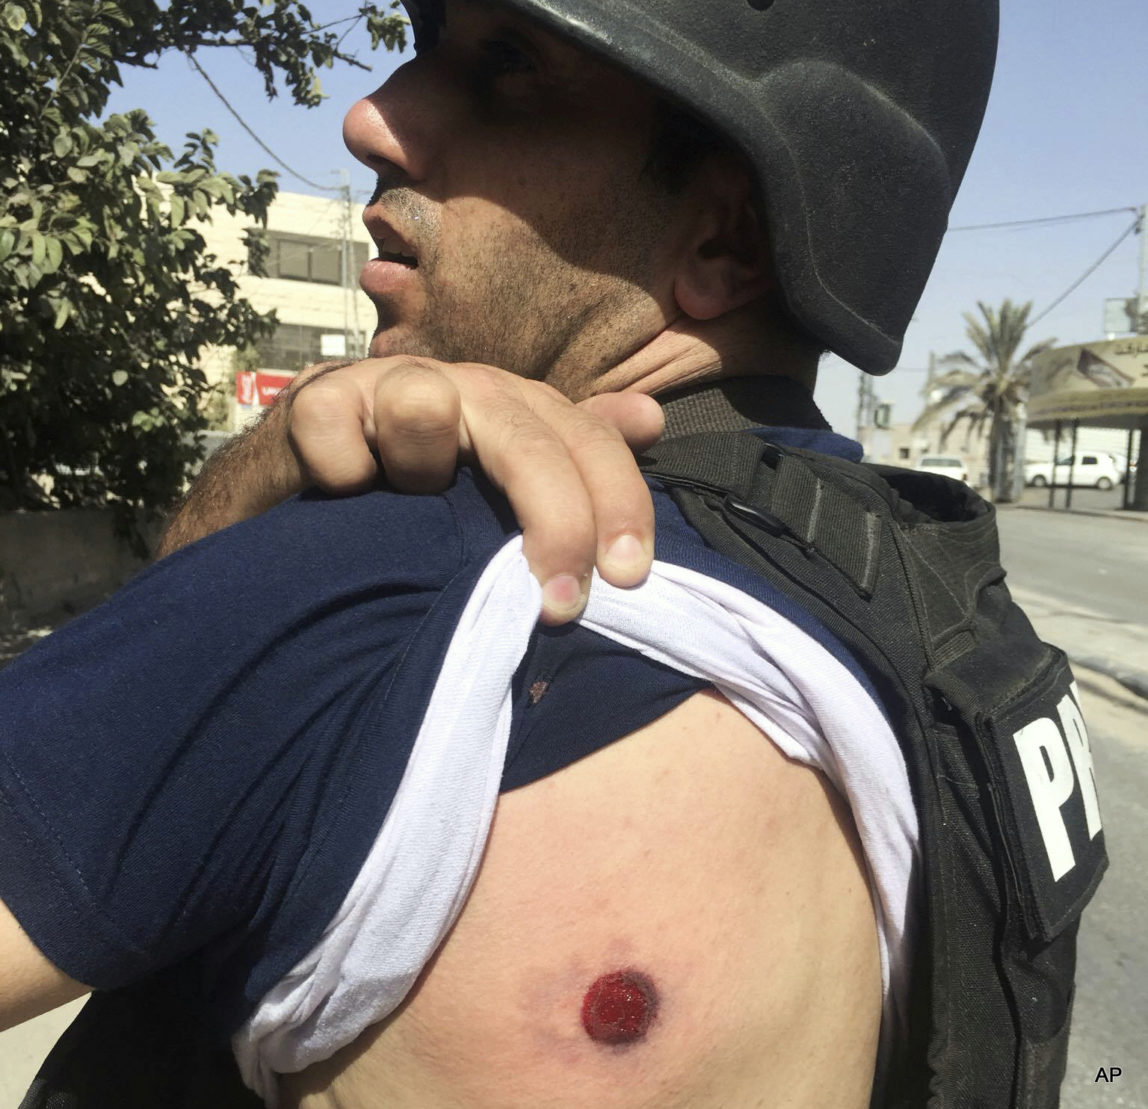 The Associated Press Photographer Majdi Mohammed shows a bruise after he was hit with a rubber bullet while covering clashes between Israeli forces and Palestinians in the town of al Ram, West Bank, Sunday, Oct. 9, 2016. Mohammed said that while he was covering the clashes, one of the Israelis cursed him and ordered him to leave. He said that as he turned around to leave, he was shot from close range in the back of his shoulder, an area that was not covered by his protective vest.